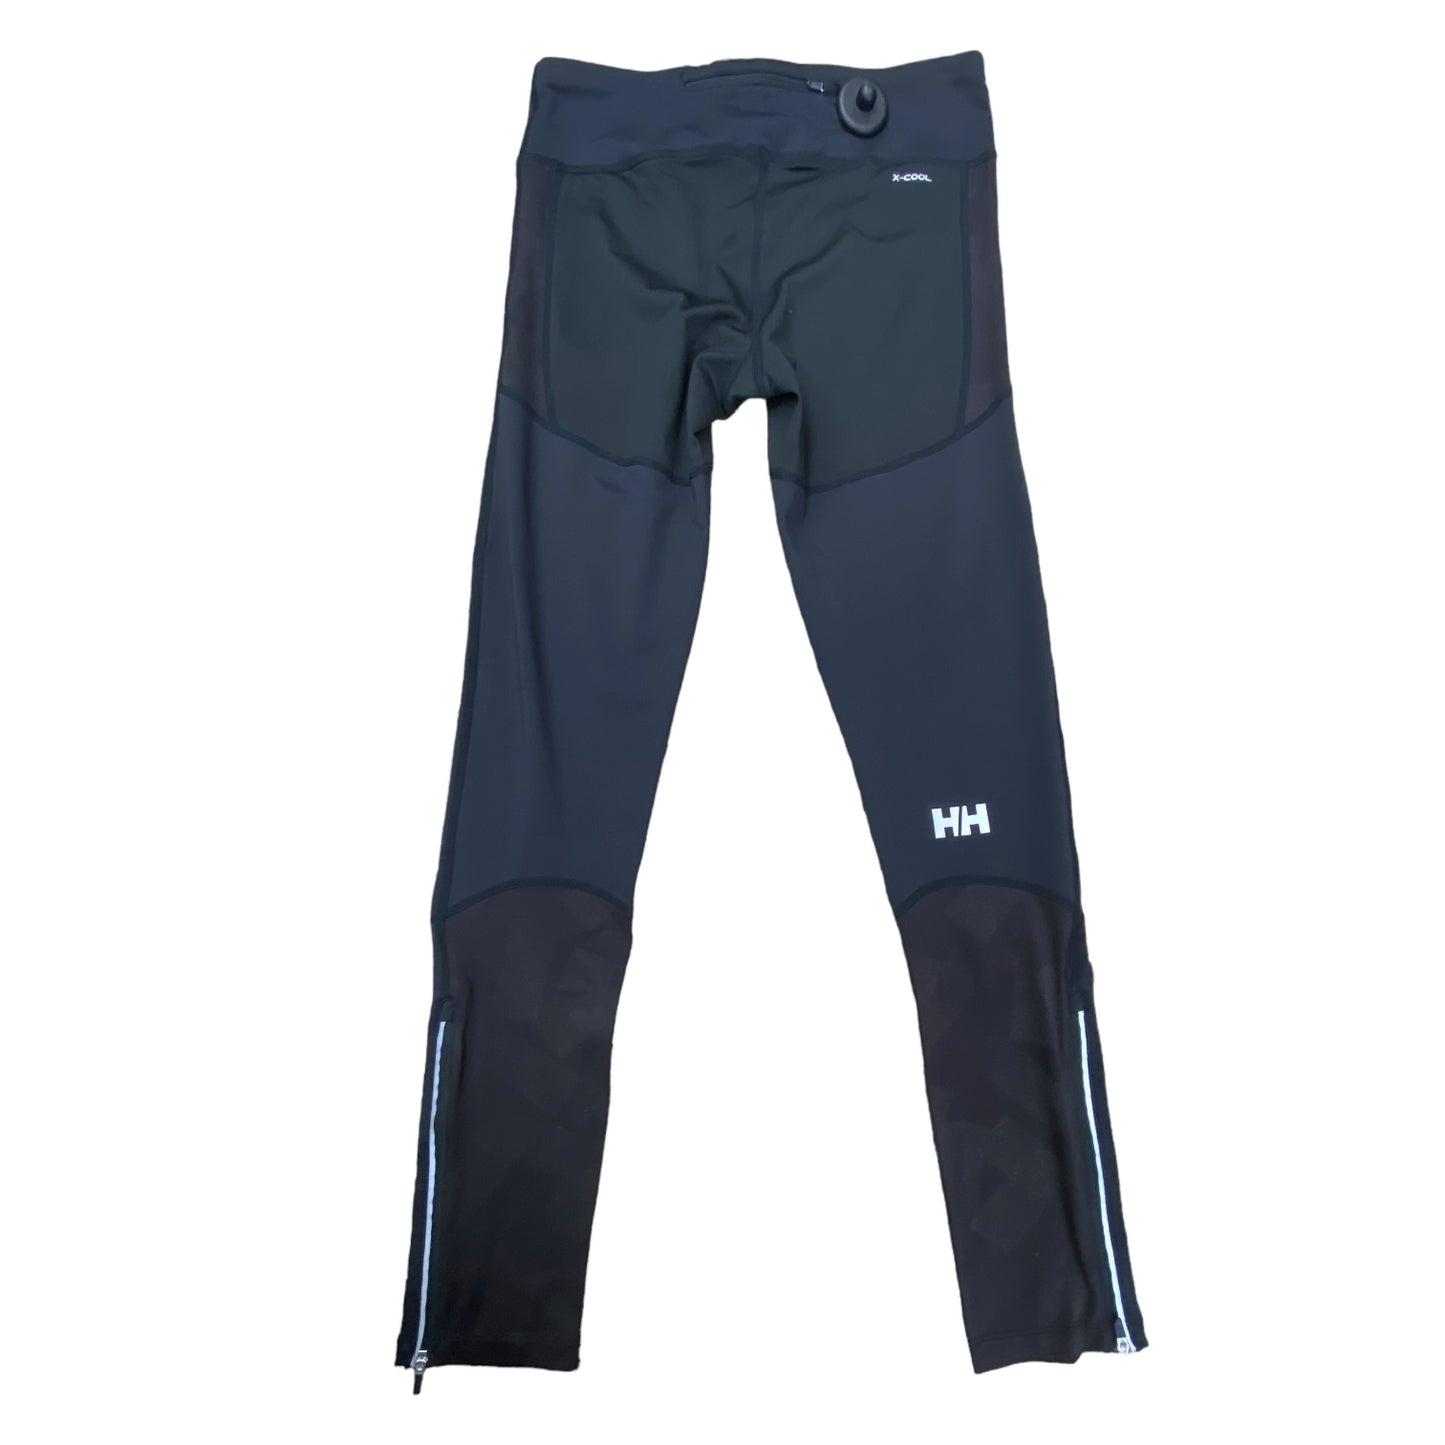 Athletic Leggings By Helly Hansen  Size: M